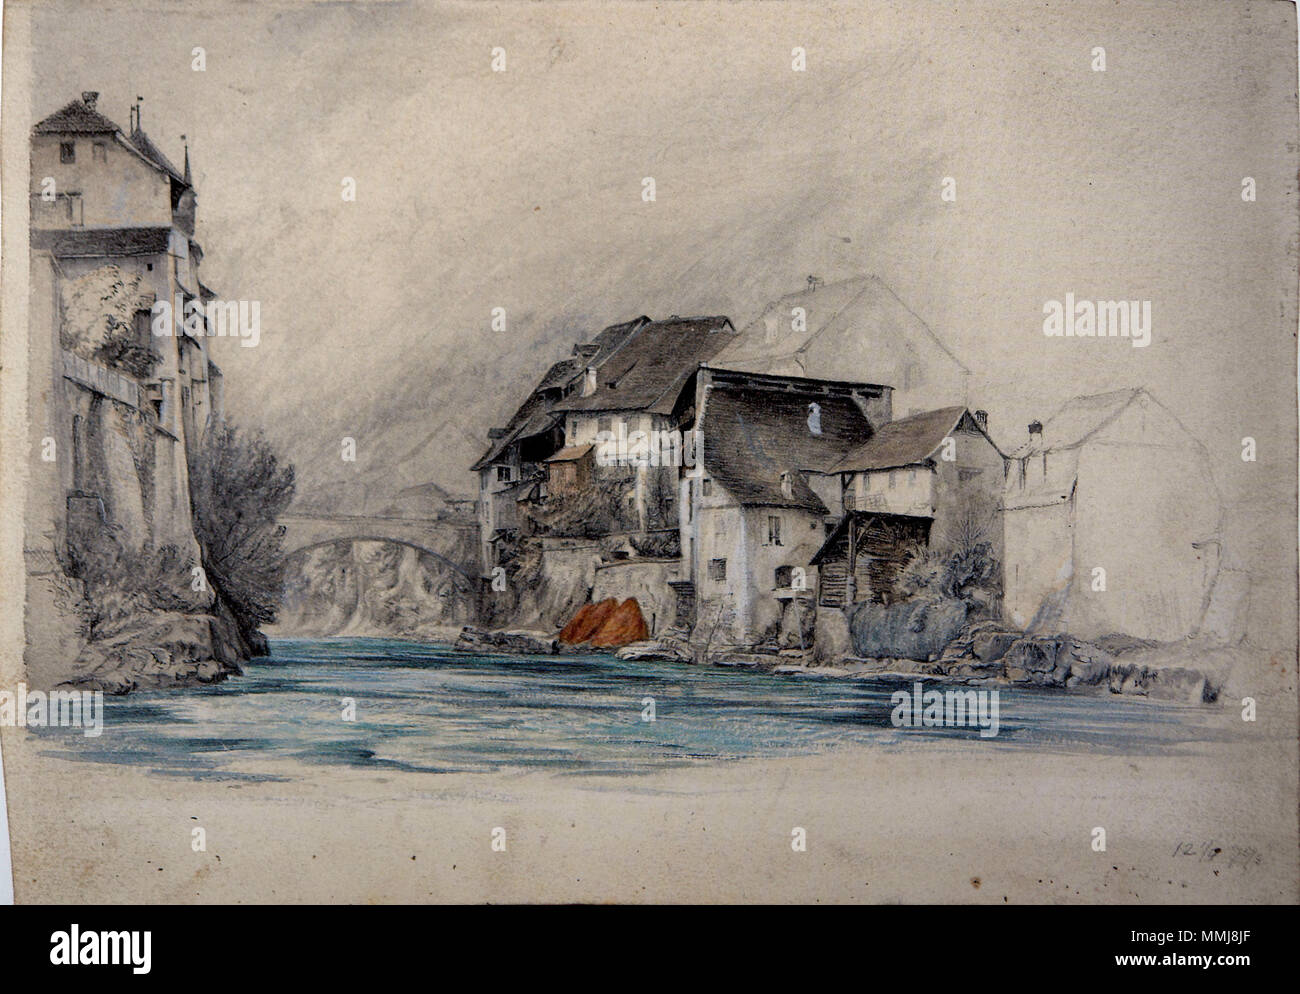 . Brugg. Pencil, watercolour and bodycolour, 22.3 x 32.4 cm  . 1863.   John Ruskin  (1819–1900)       Alternative names Ruskin  Description British author, poet, artist and art critic  Date of birth/death 8 February 1819 20 January 1900  Location of birth/death London English: Brantwood, Lake District  Work location England, Venice, Switzerland, France  Authority control  : Q179126 VIAF:?73859585 ISNI:?0000 0001 2139 3446 ULAN:?500006262 LCCN:?n79006950 NLA:?36583544 WorldCat Brugg Ruskin Stock Photo